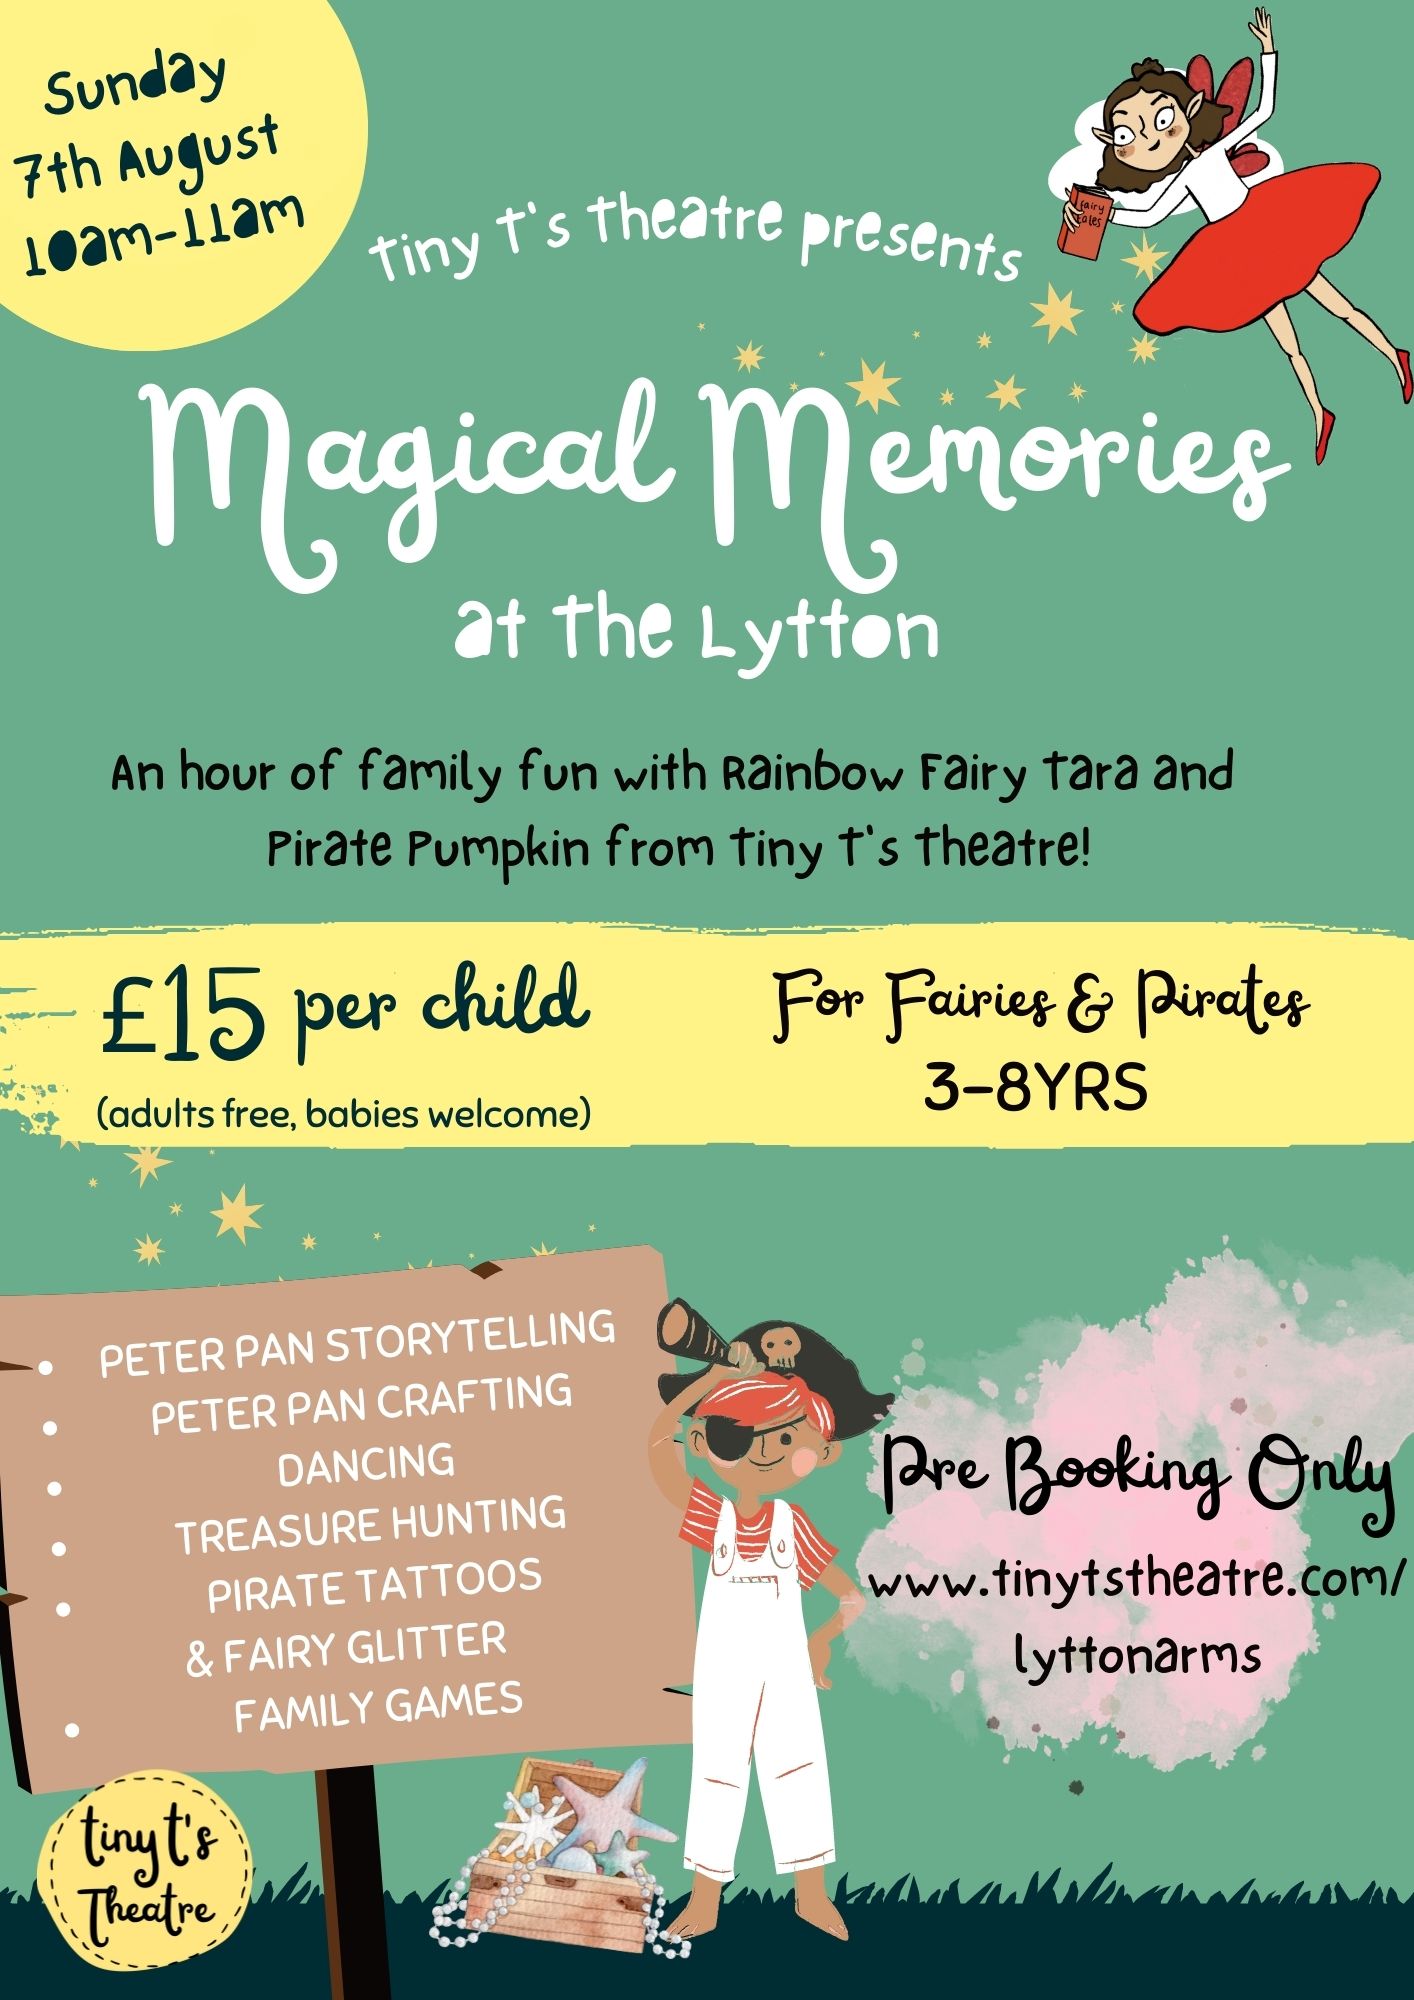 Tiny T's Theatre Presents - Magical Memories at The Lytton